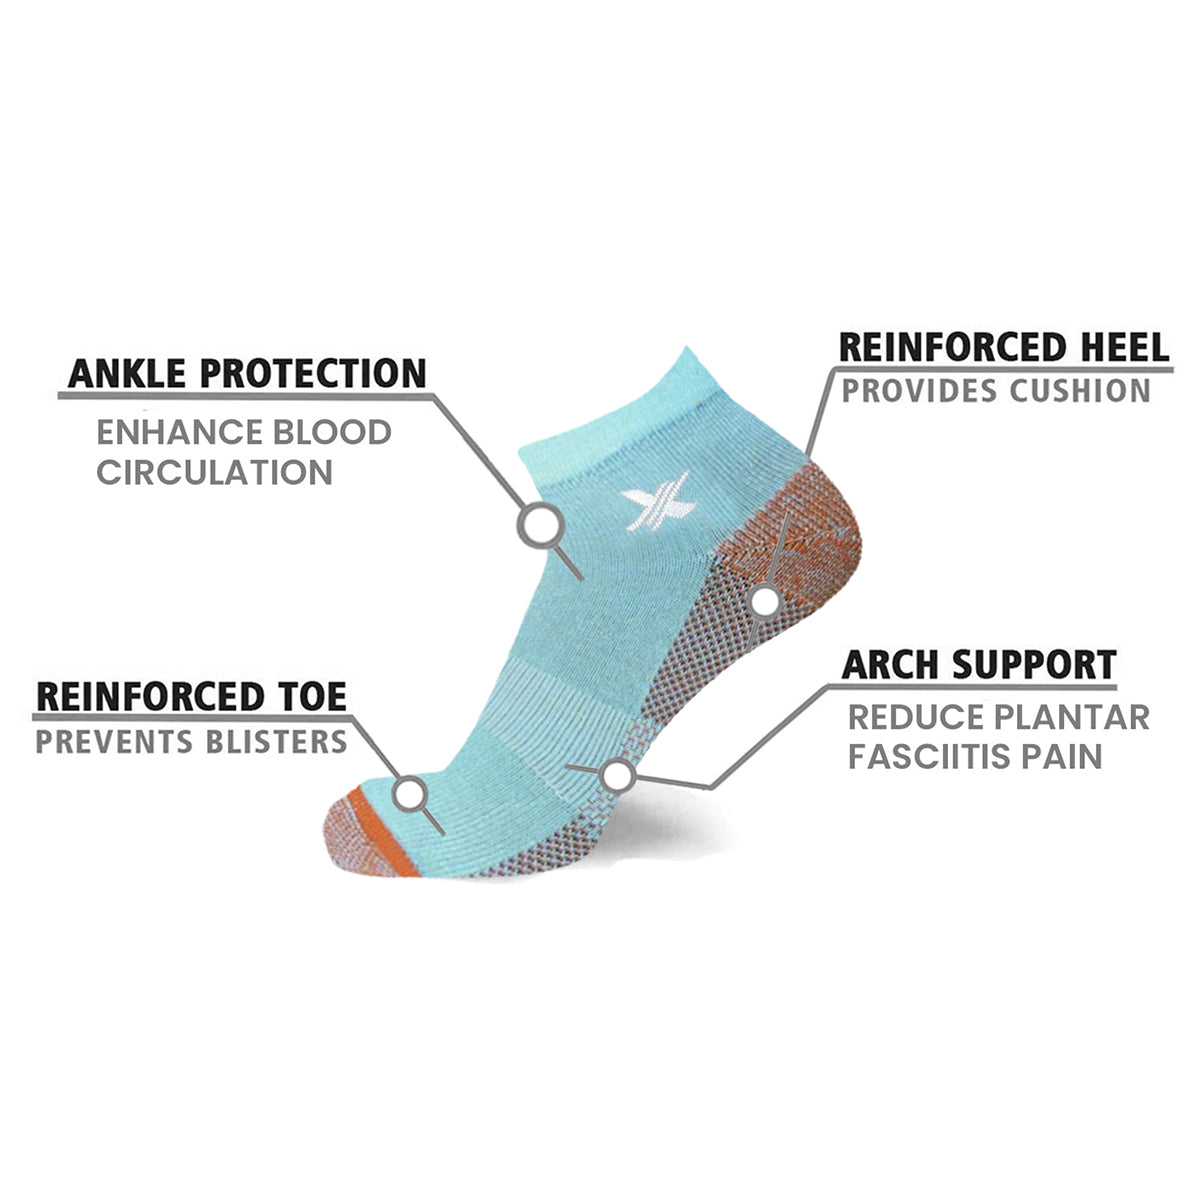 Copper-Infused Socks - Colored (6-Pairs)